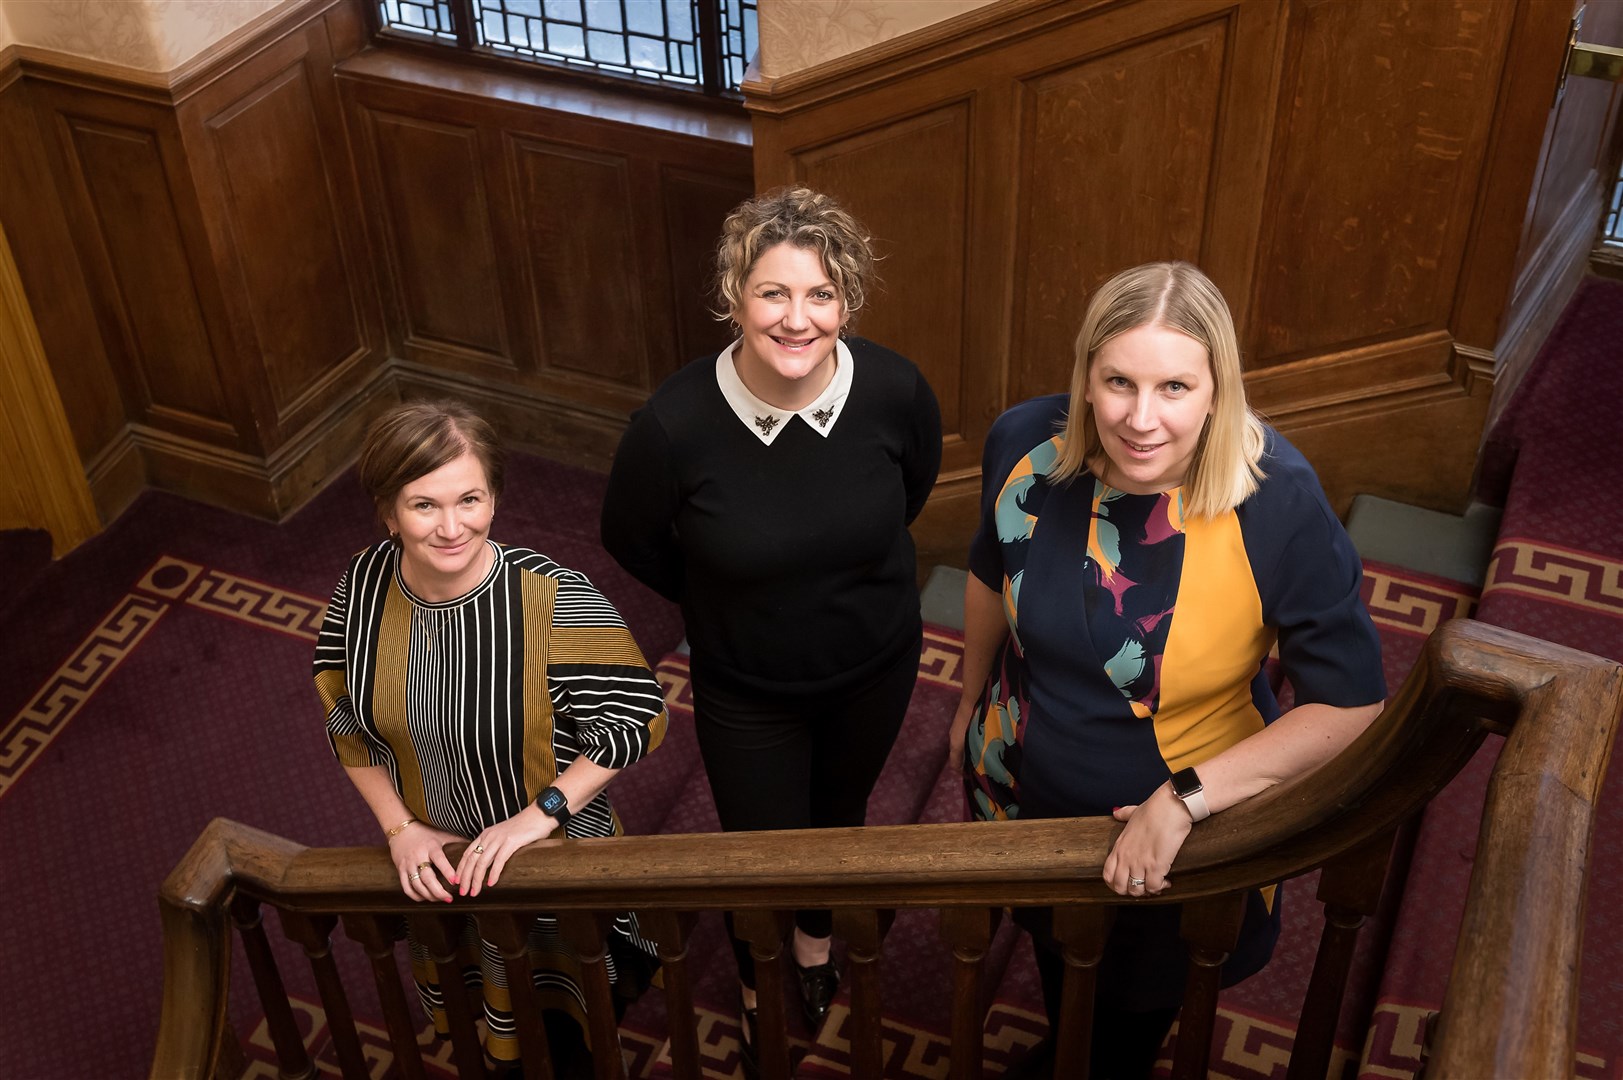 Women's Enterprise Scotland (WES), City Chambers, EdinburghLeading Highland business figures join WES Ambassador programme.For more information contact Gaynor Simpson (WES) on 07790104073, gaynor@wescotland.co.uk .Pic free for first use relating to WES.L to R, Jennifer MacKenzie, Melanie MacIntyre and Nathalie Agnew.